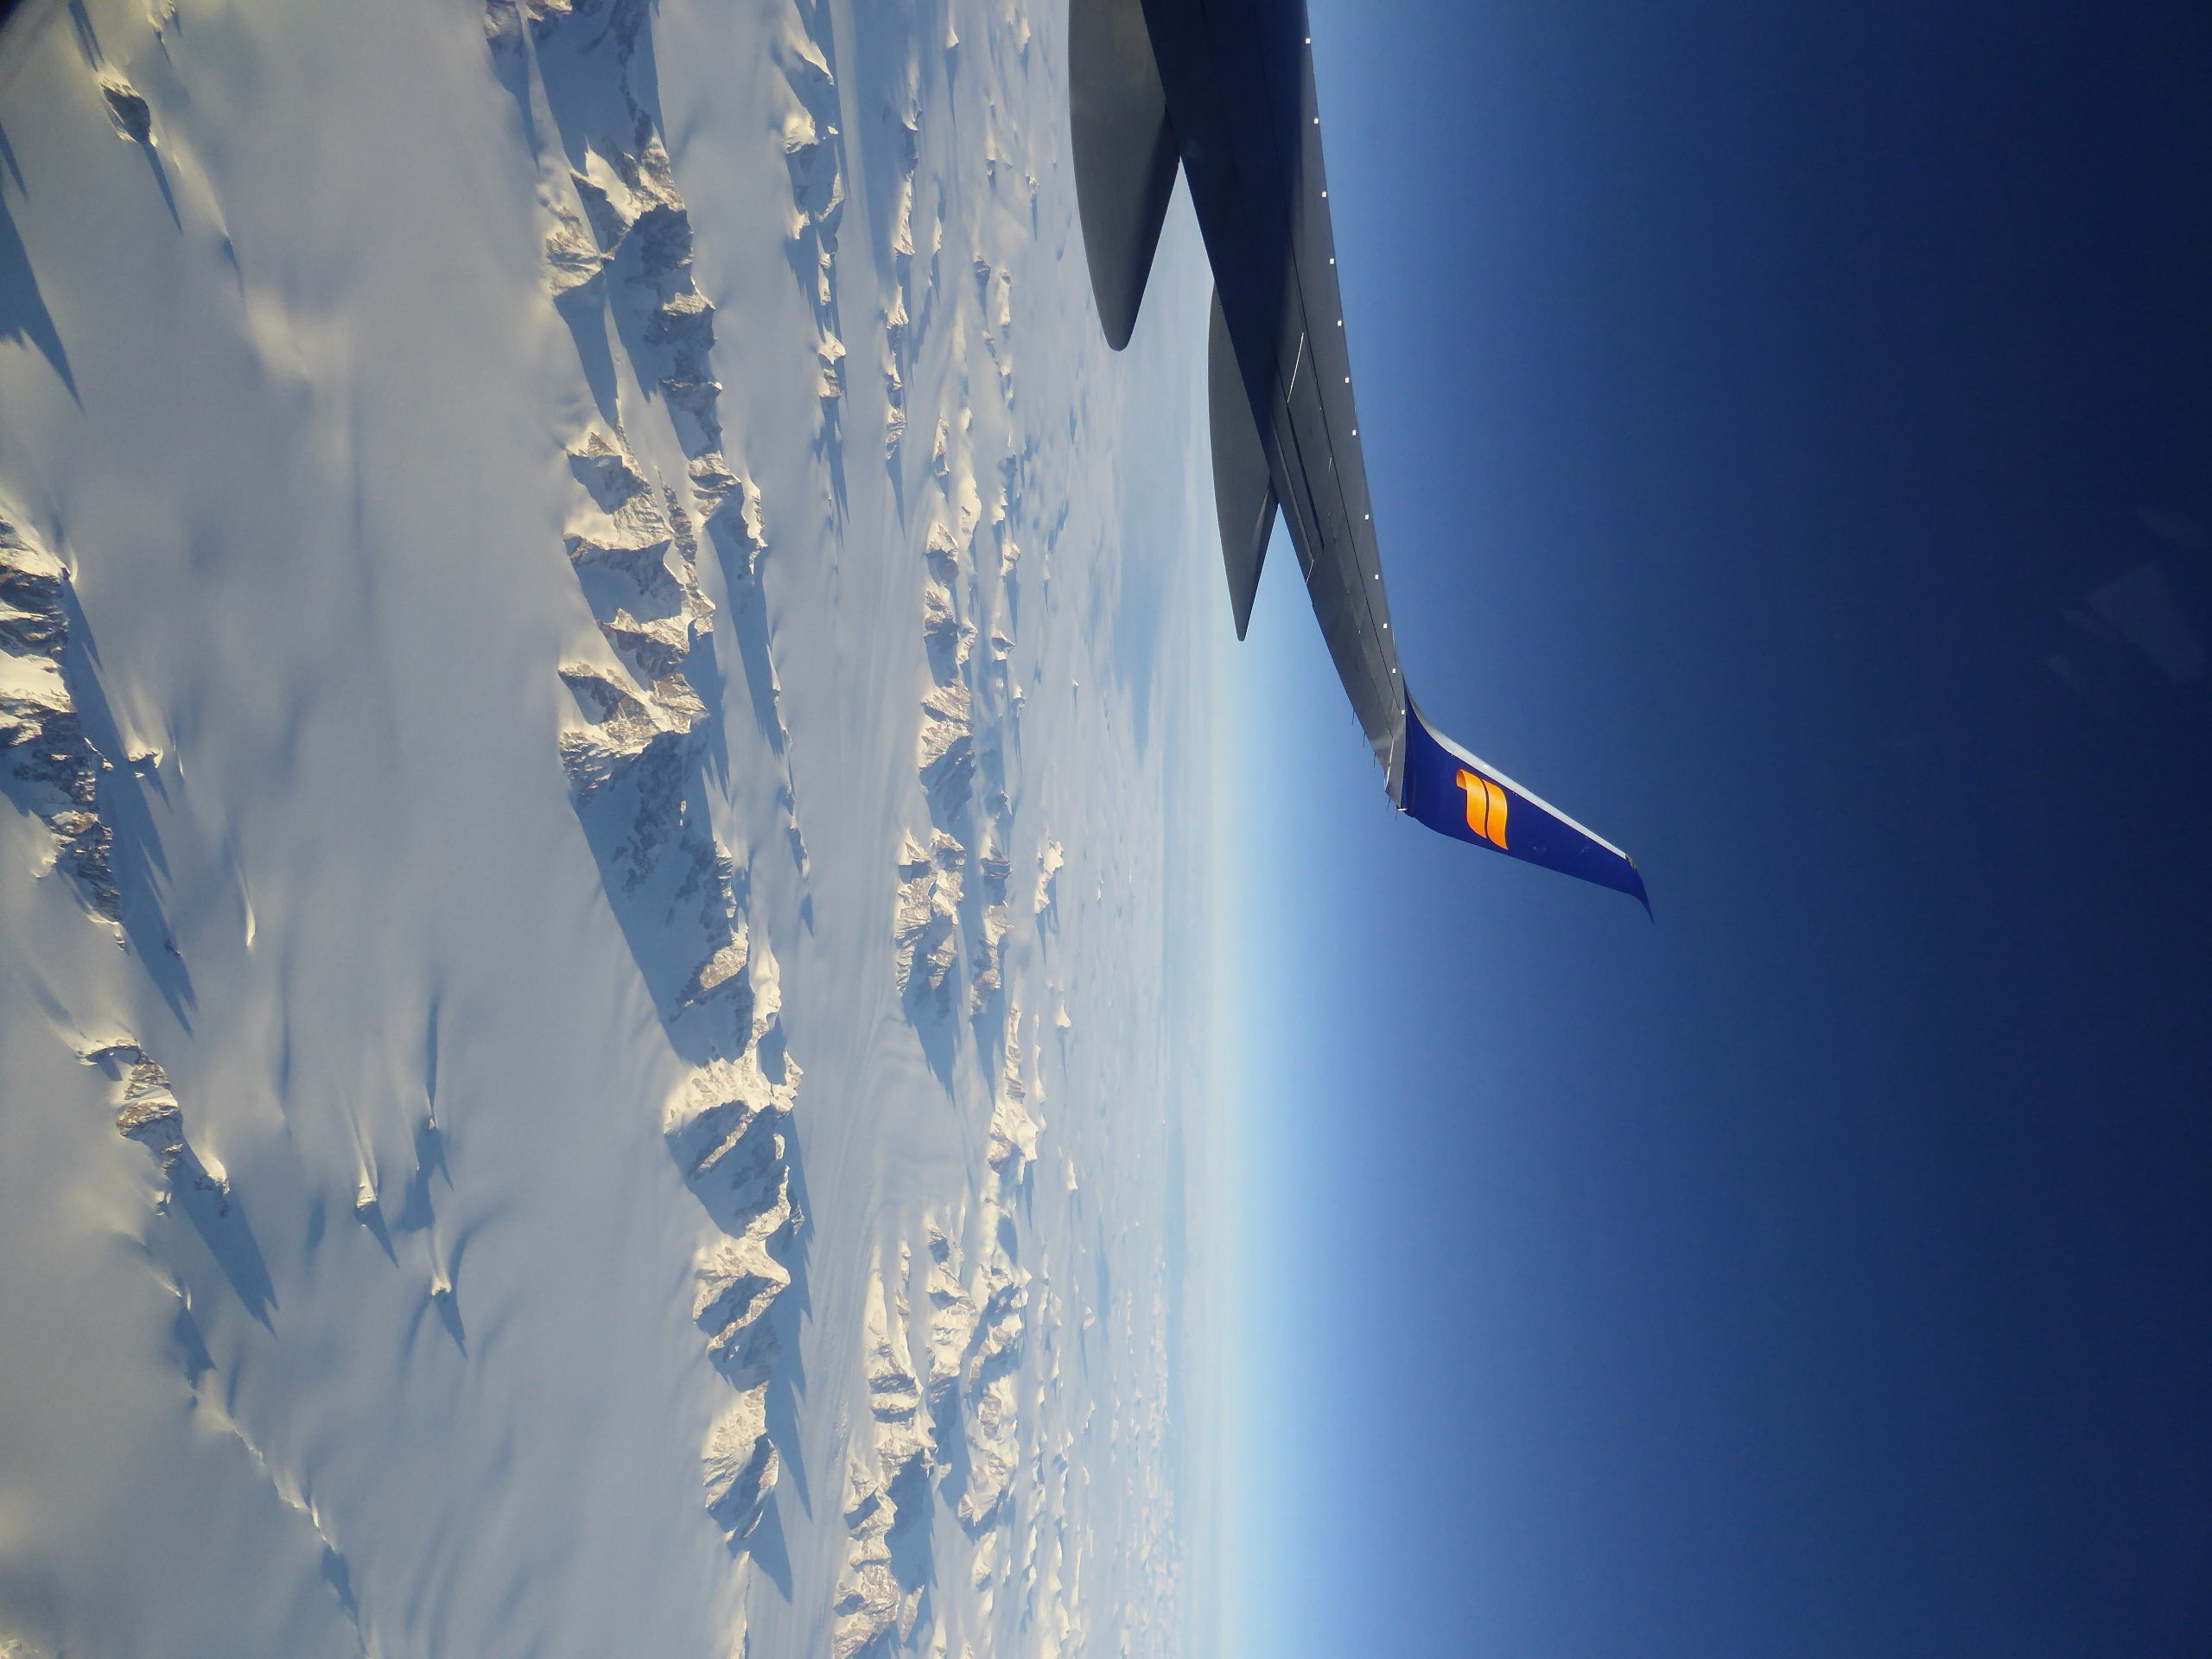 The Air Over Iceland